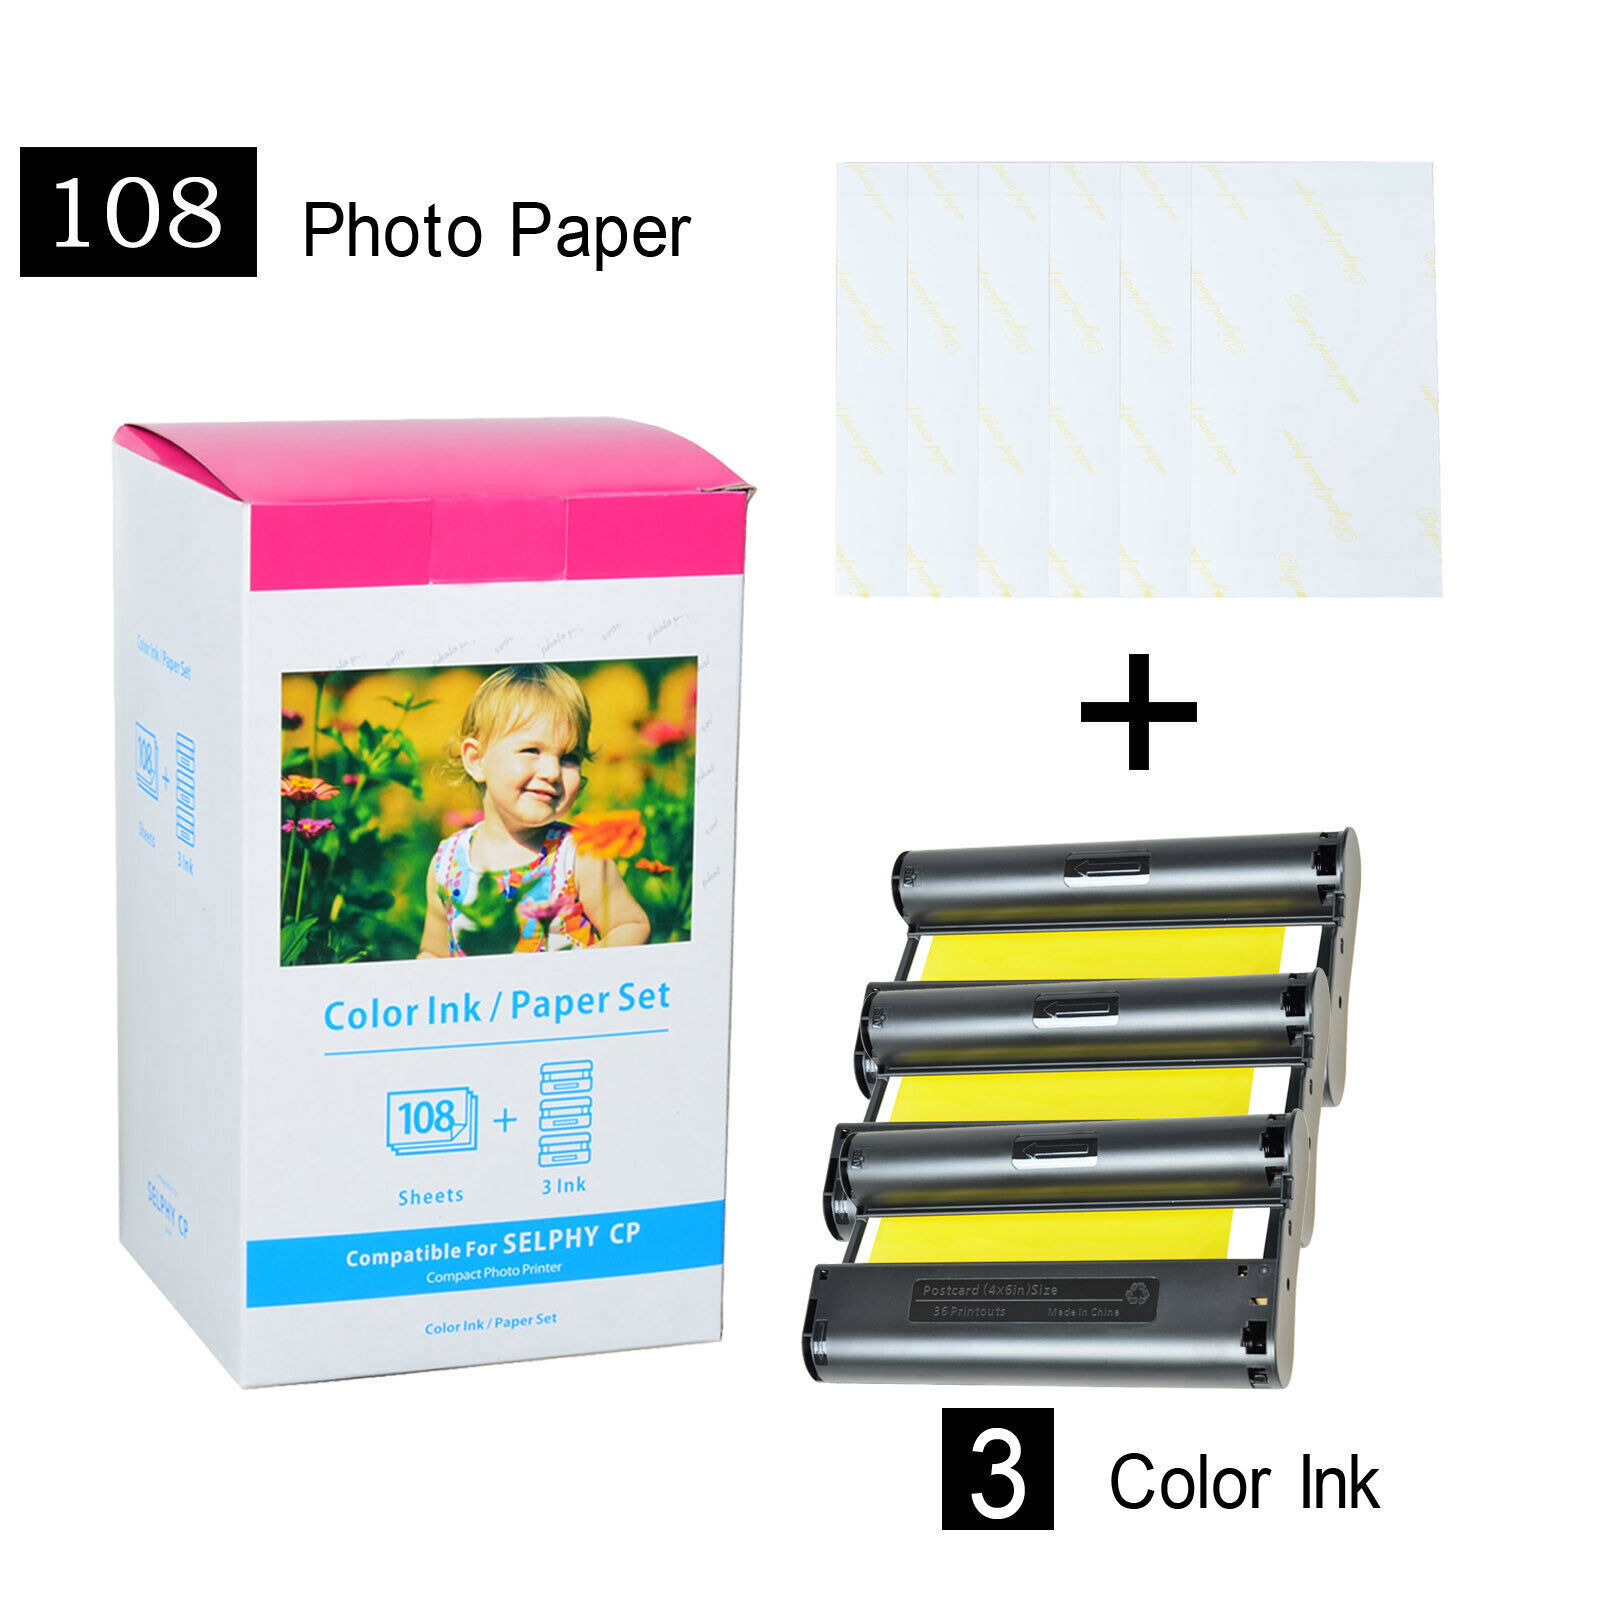 KP-108IN Color 3X Ink & 108 Photo Paper Set for Canon Selphy CP910 CP1200 CP1300